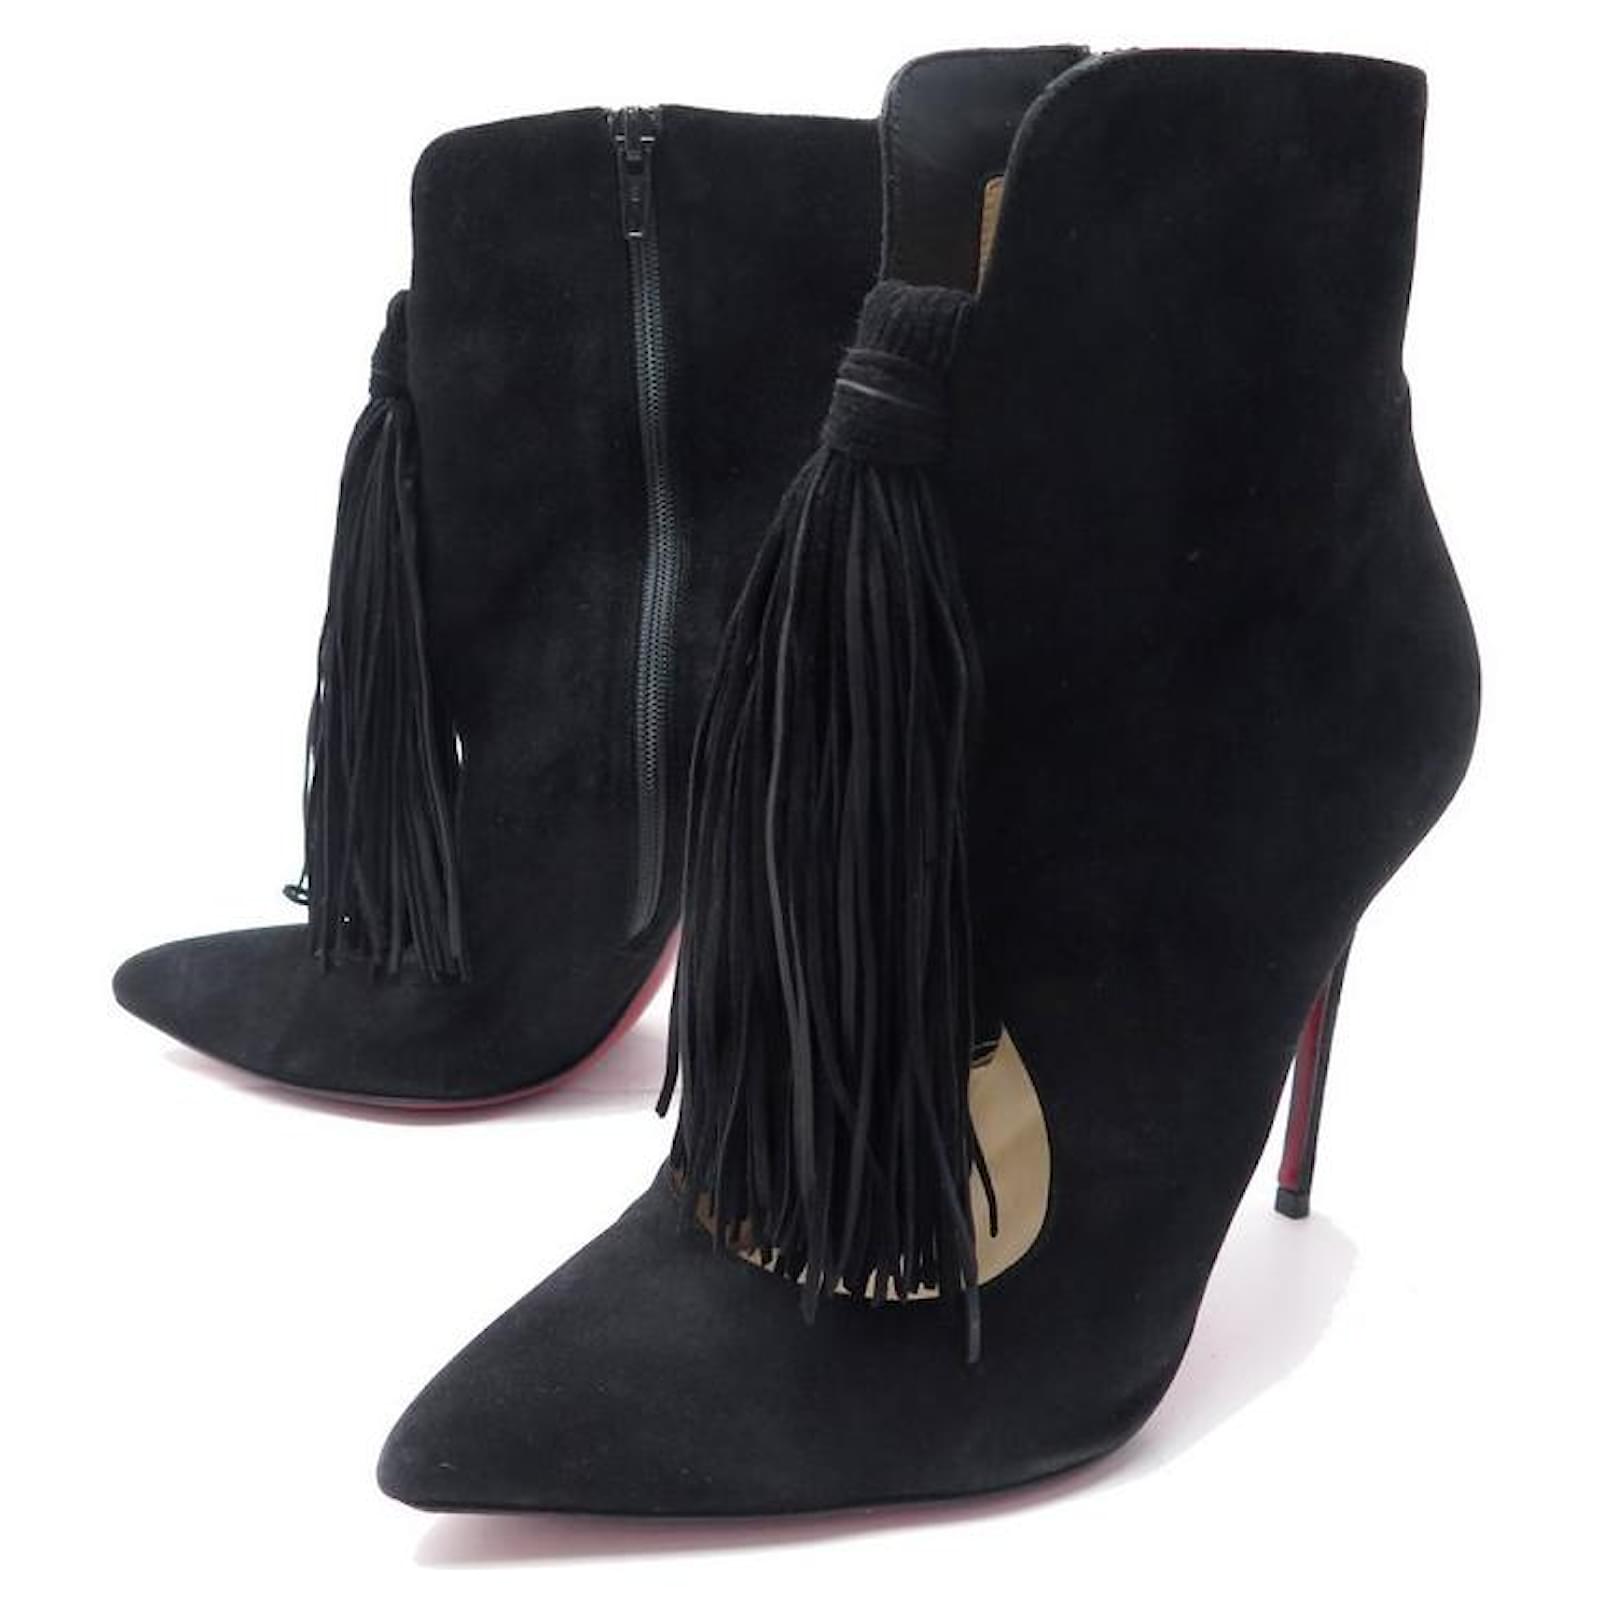 Christian Louboutin Women's Ankle Boots - Shoes